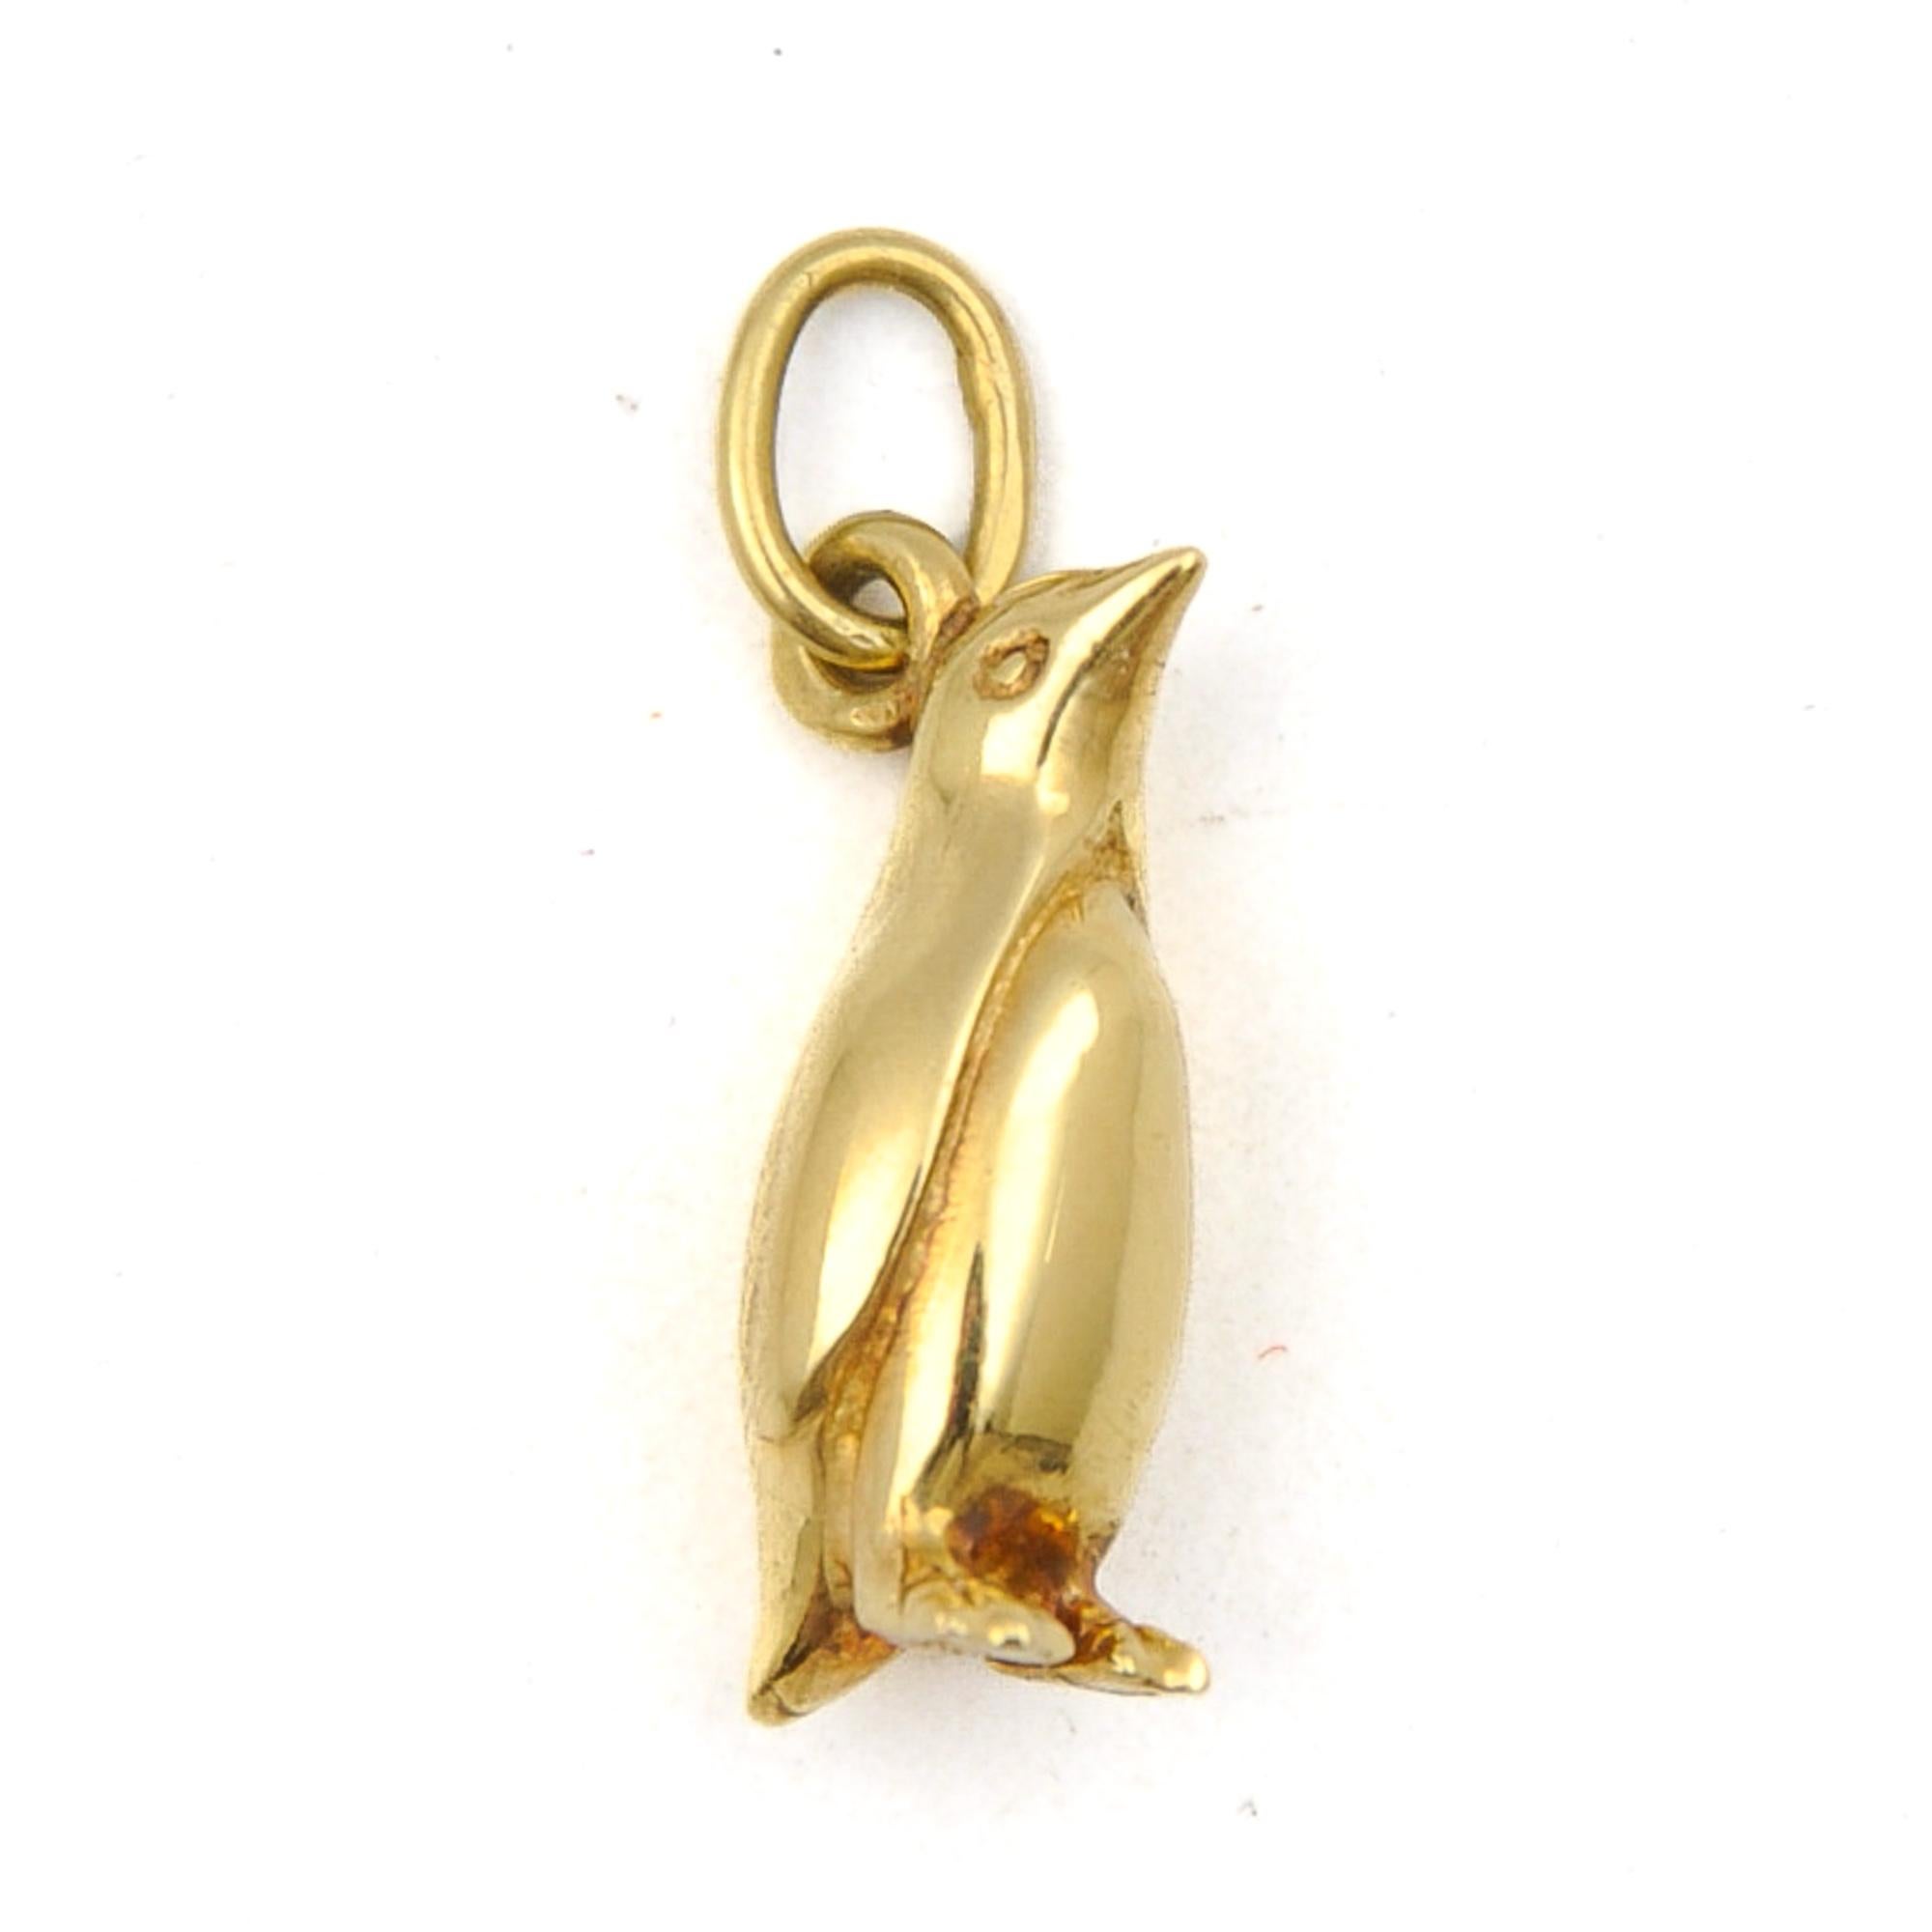 A three-dimensional stylized and detailed penguin charm pendant. This adorable emperor penguin has beautiful details with a round belly, little feet, wings, beak and a tail. This elegant arctic creature is made in solid 18 karat gold. 

Penguins